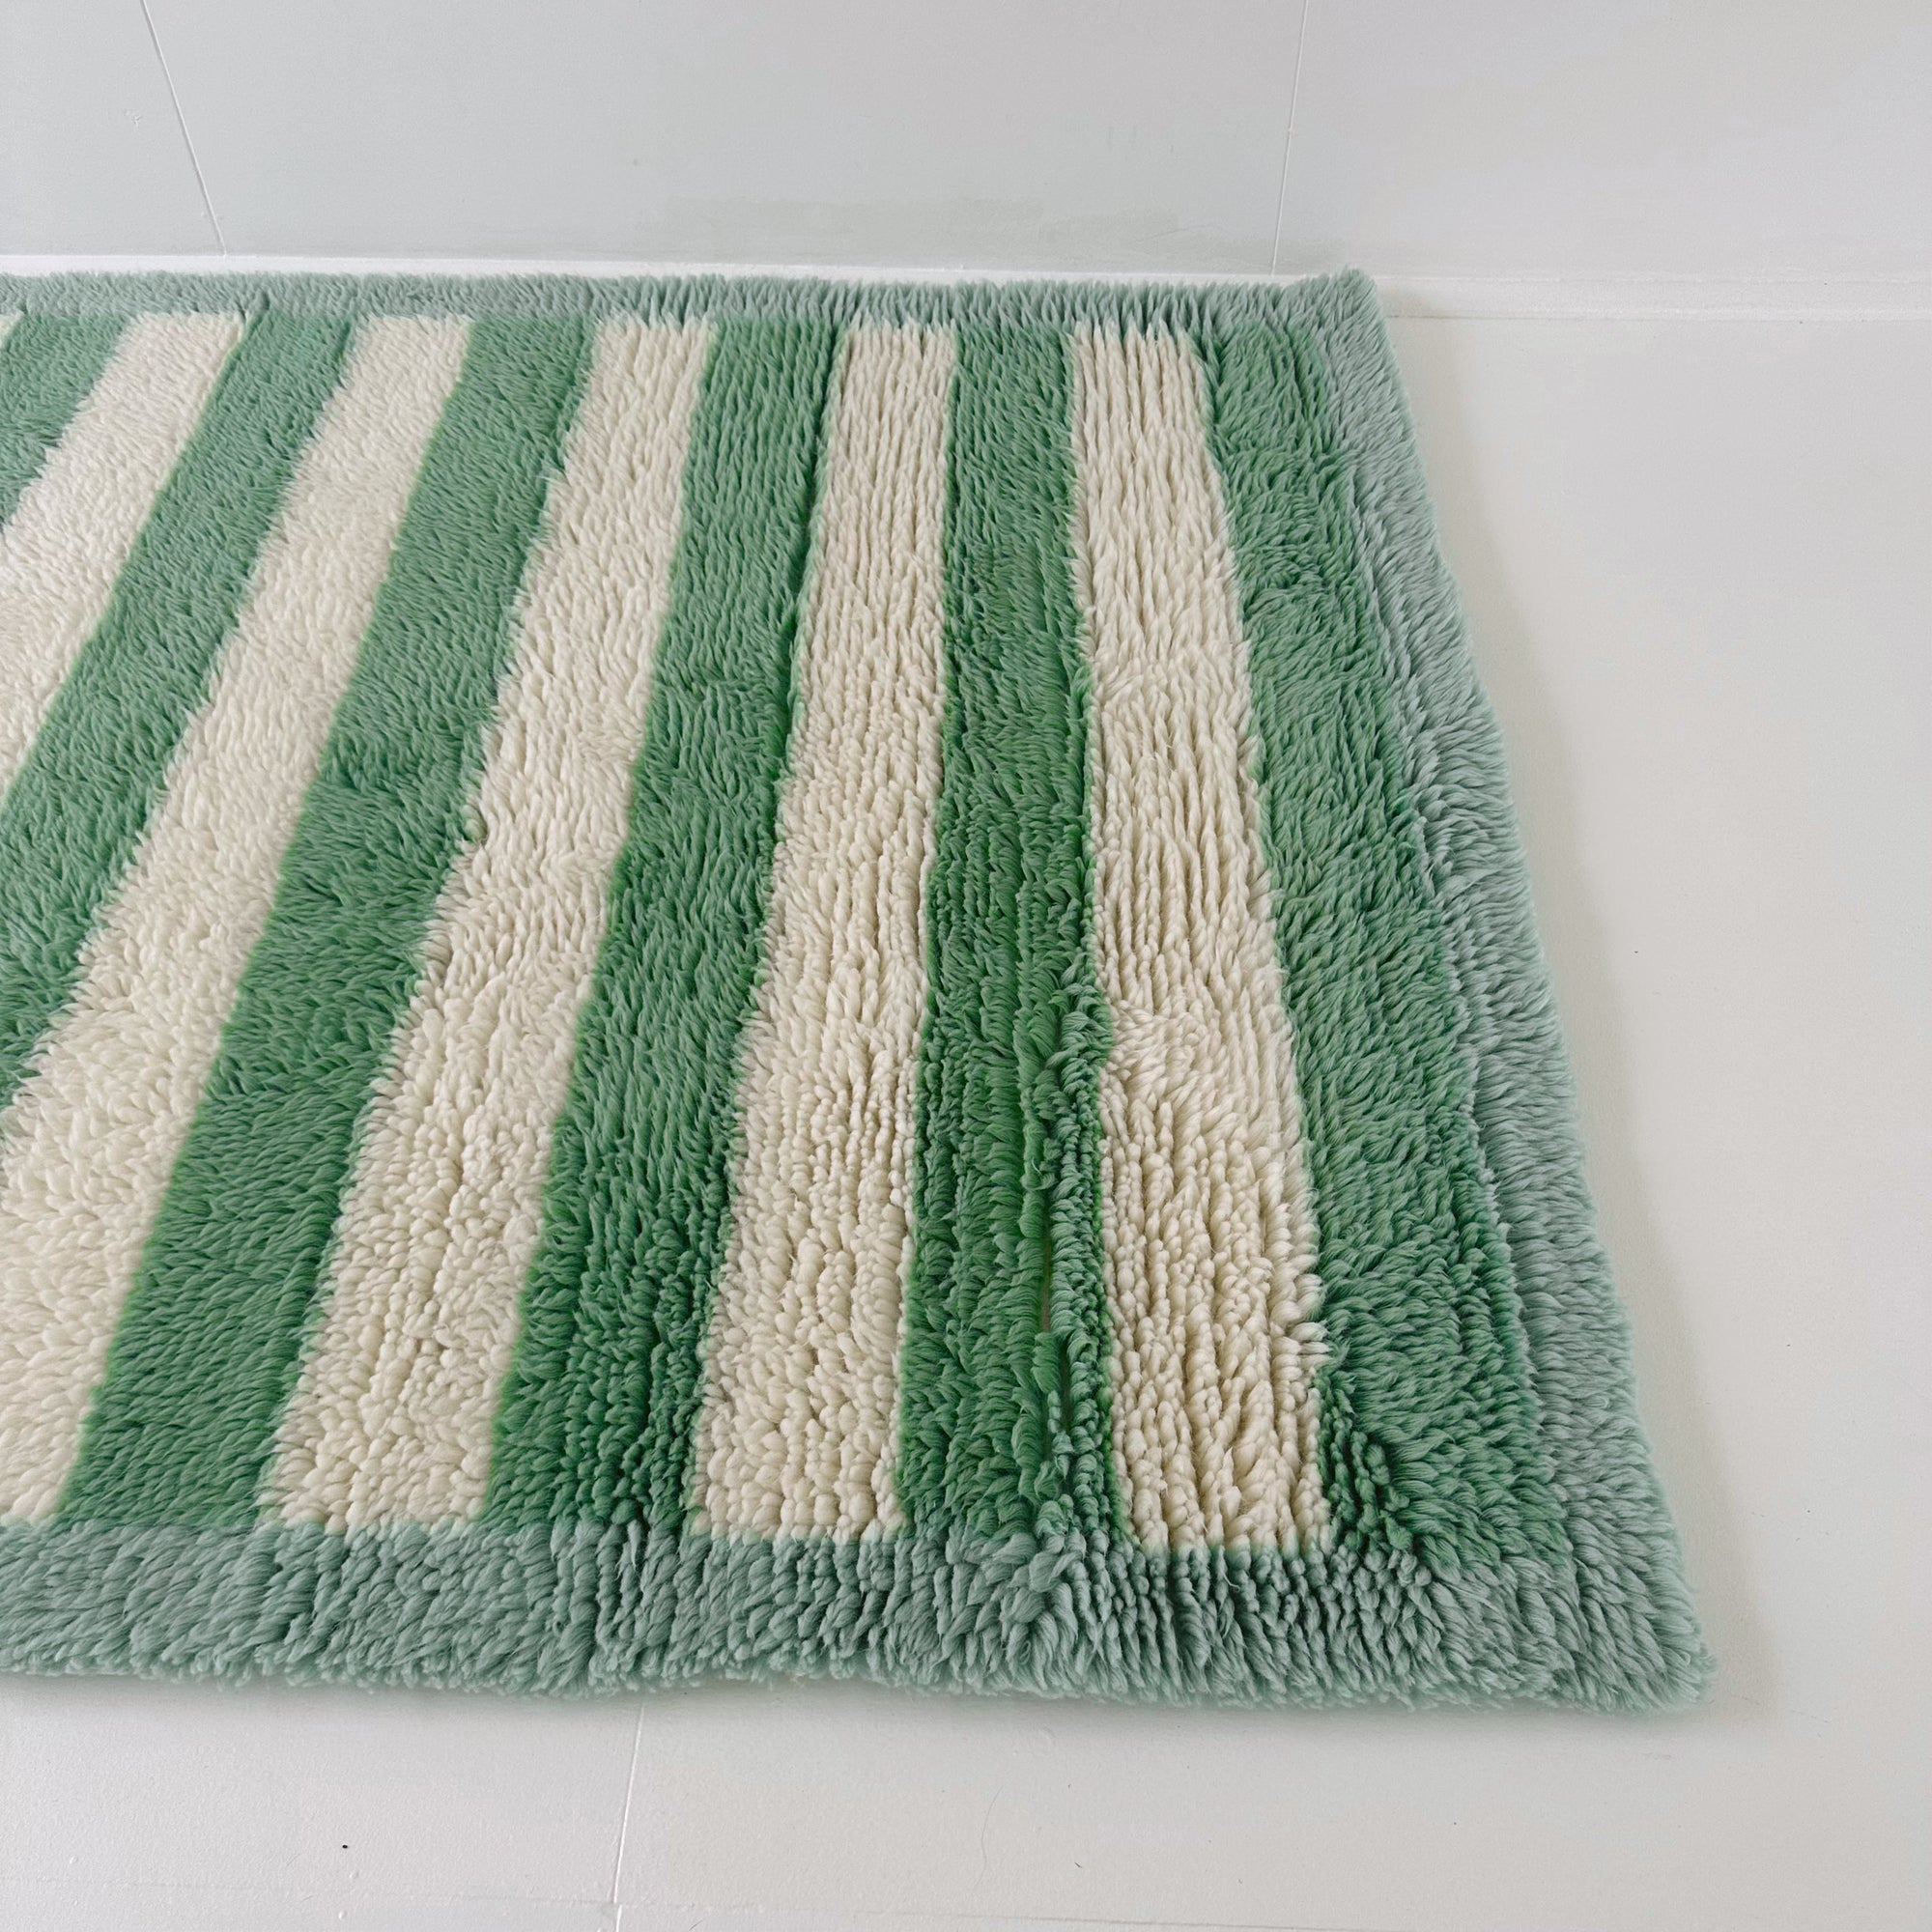 BONNIE AND NEIL STRIPE MINT RUG: MED